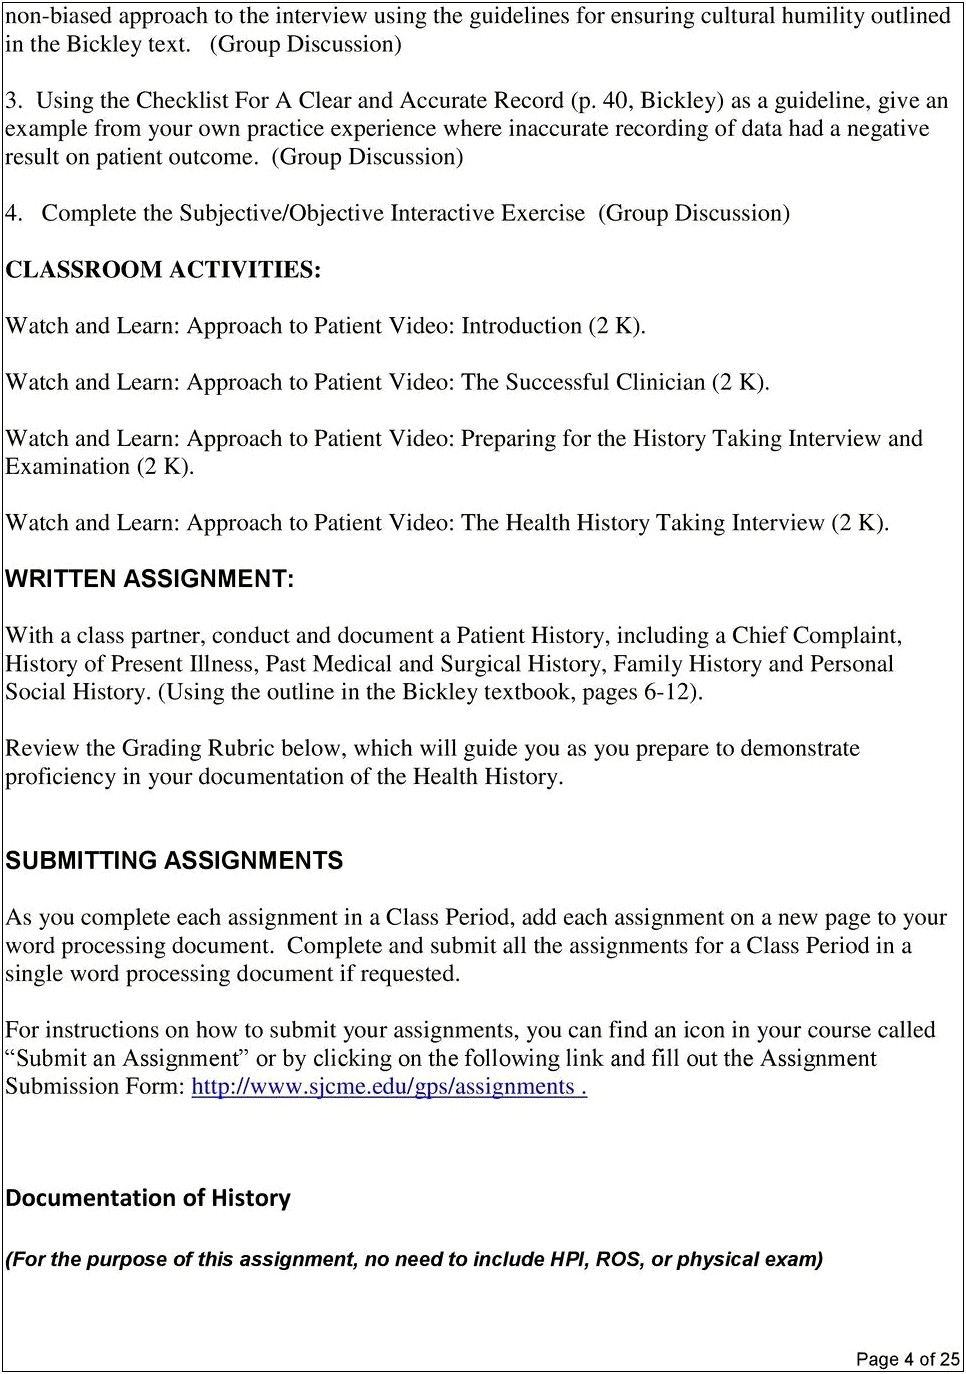 Medical History And Physical Examination Word Template